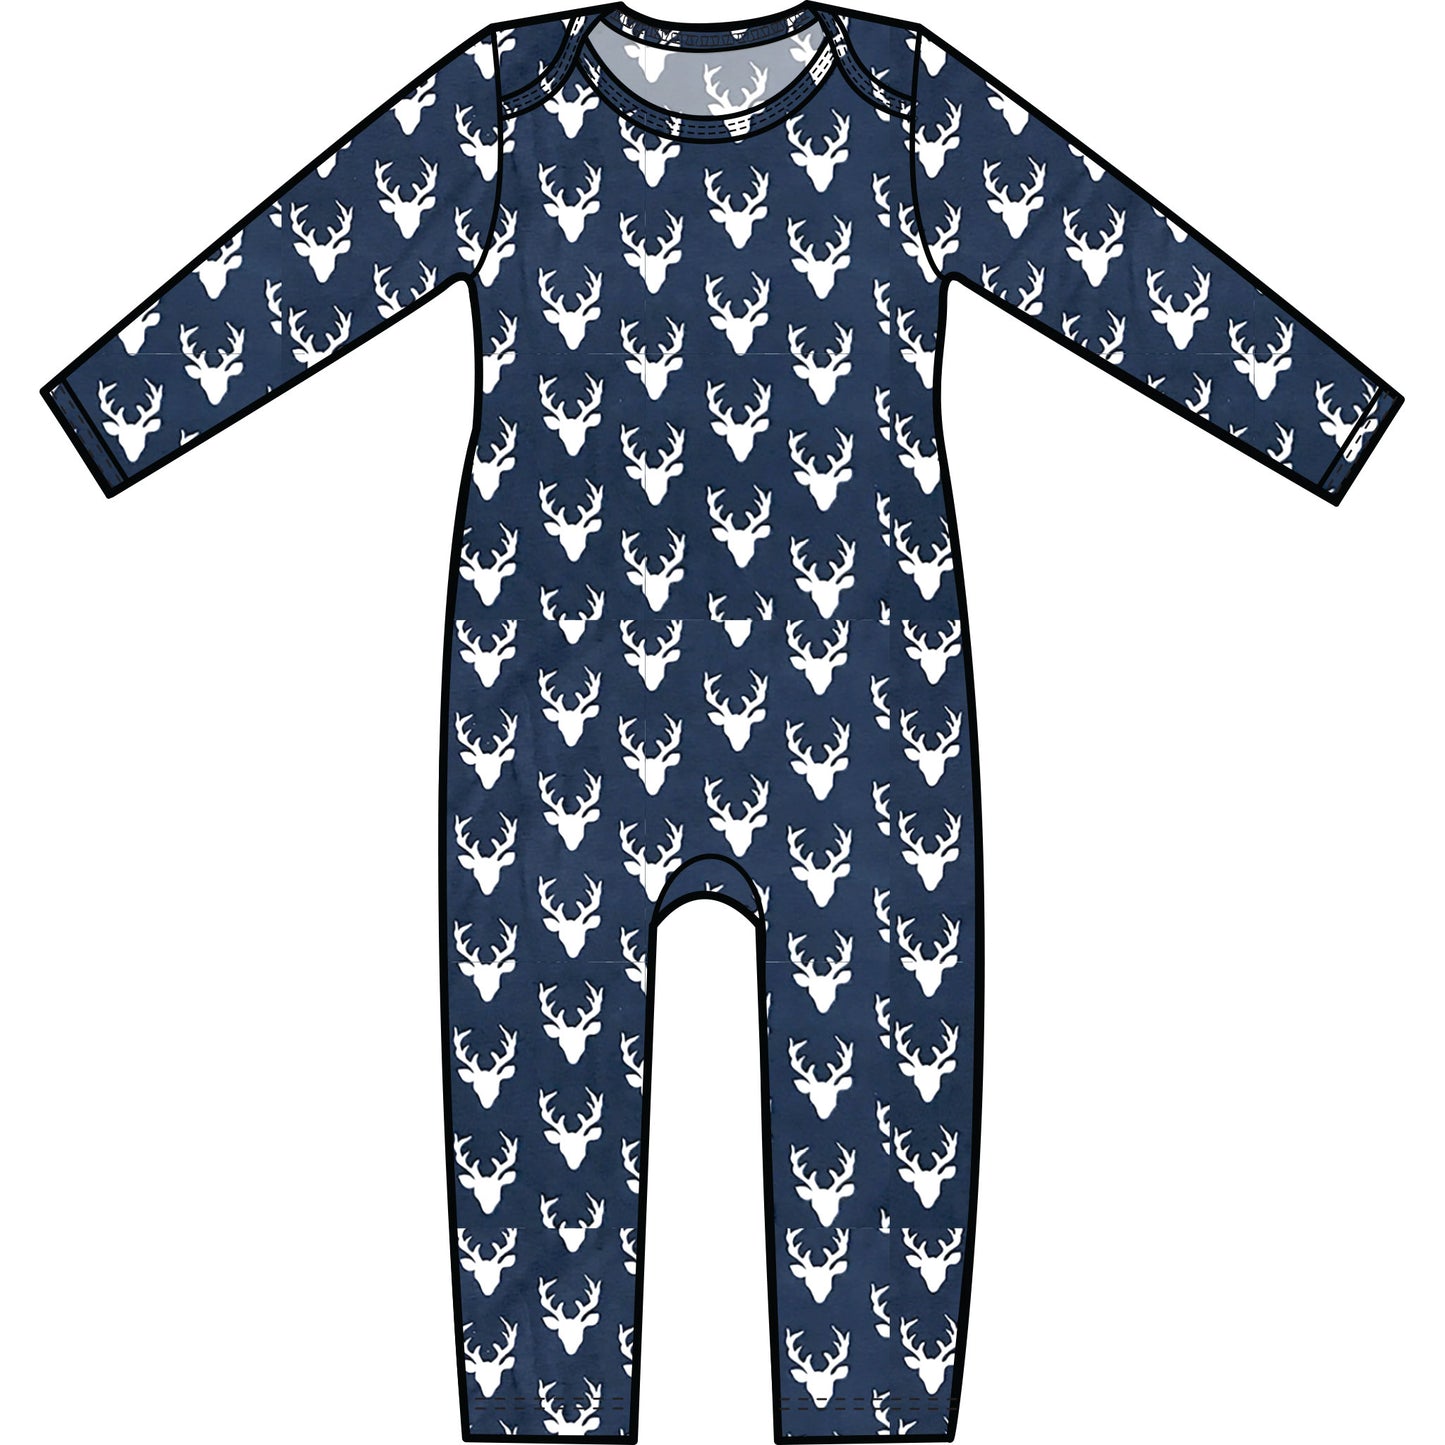 Mod Union™ Infant Long Sleeved Baby Union Suit | Various Fun Cotton Knit Prints-Baby One-Pieces-6-12 months-Stag Silhouettes-Hagsters